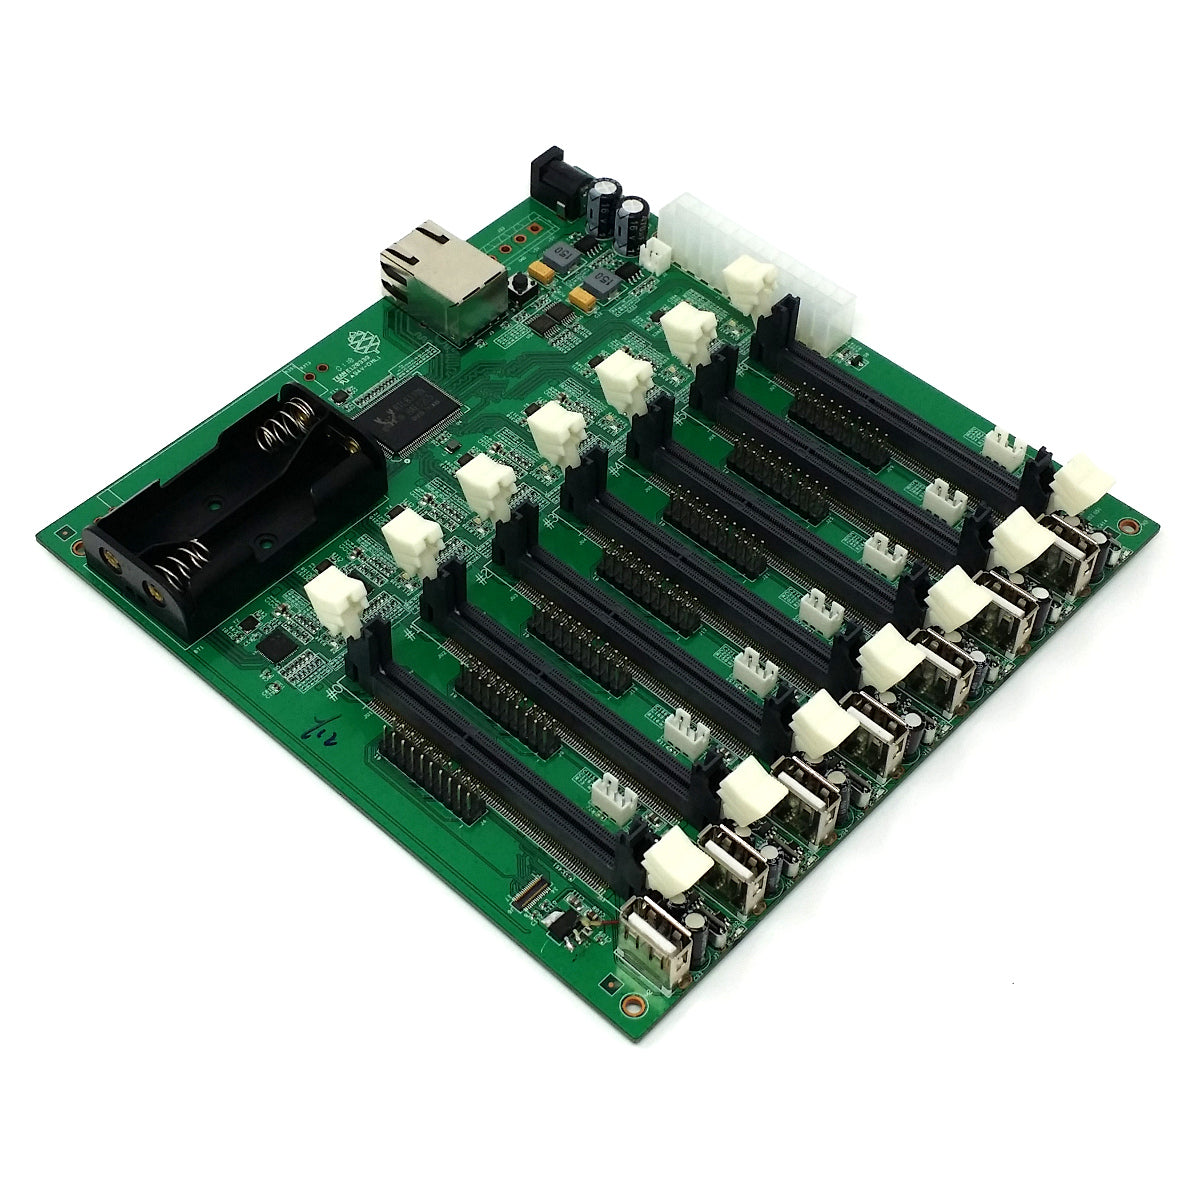 Upcoming Product: SORock and SOEdge Modules From Pine Microsystems